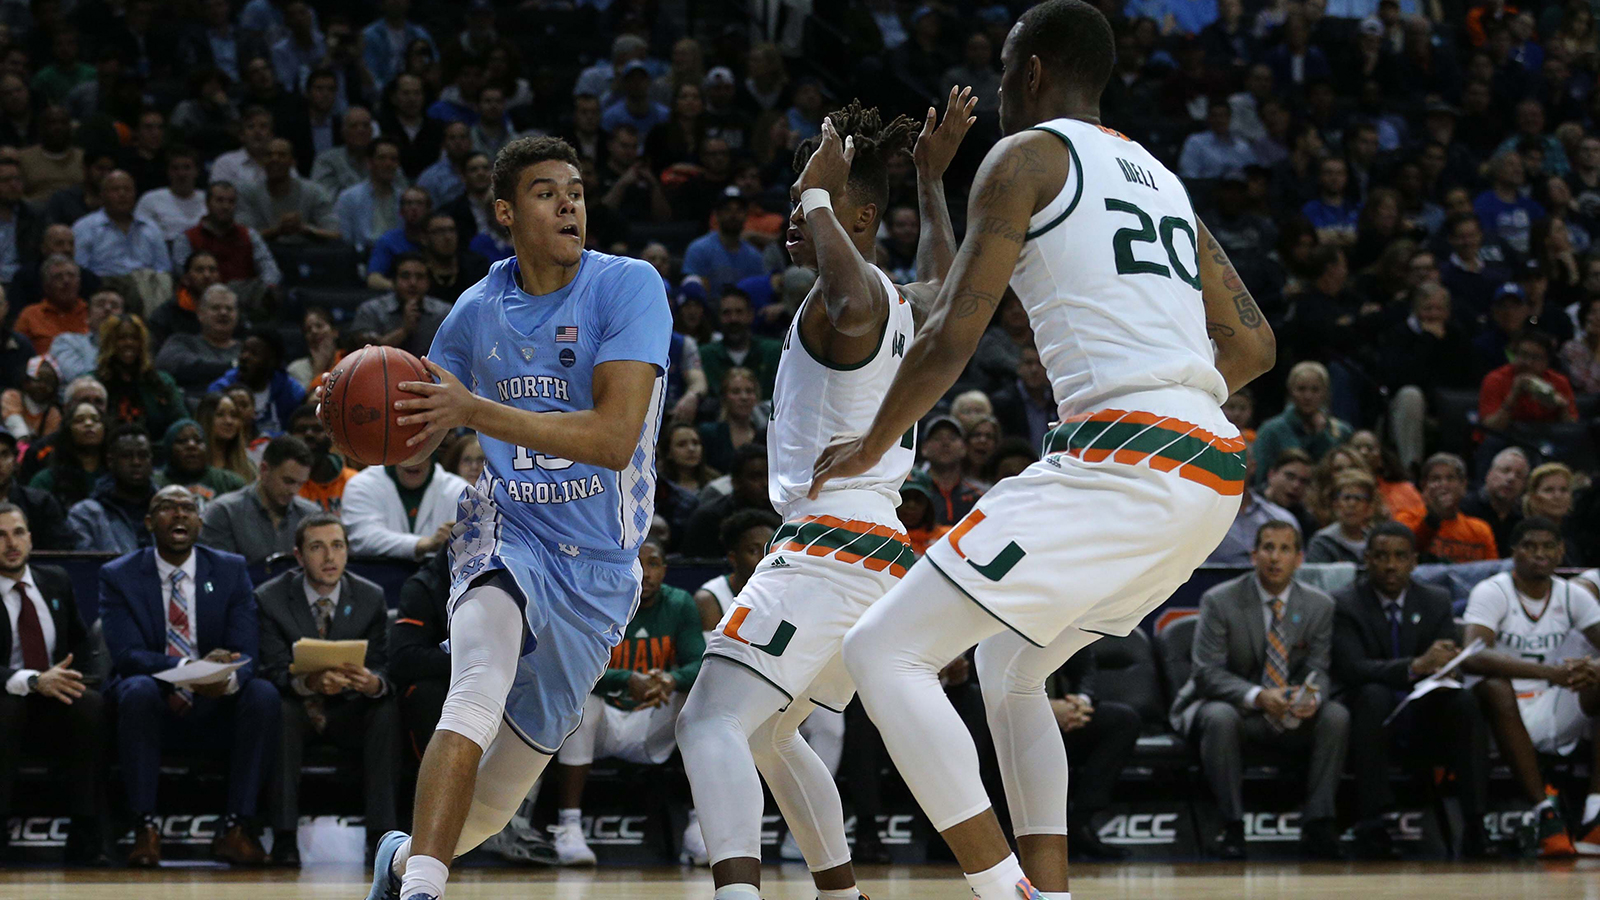 Miami grabs early lead, falters in 2nd half in loss to UNC in ACC quarterfinals